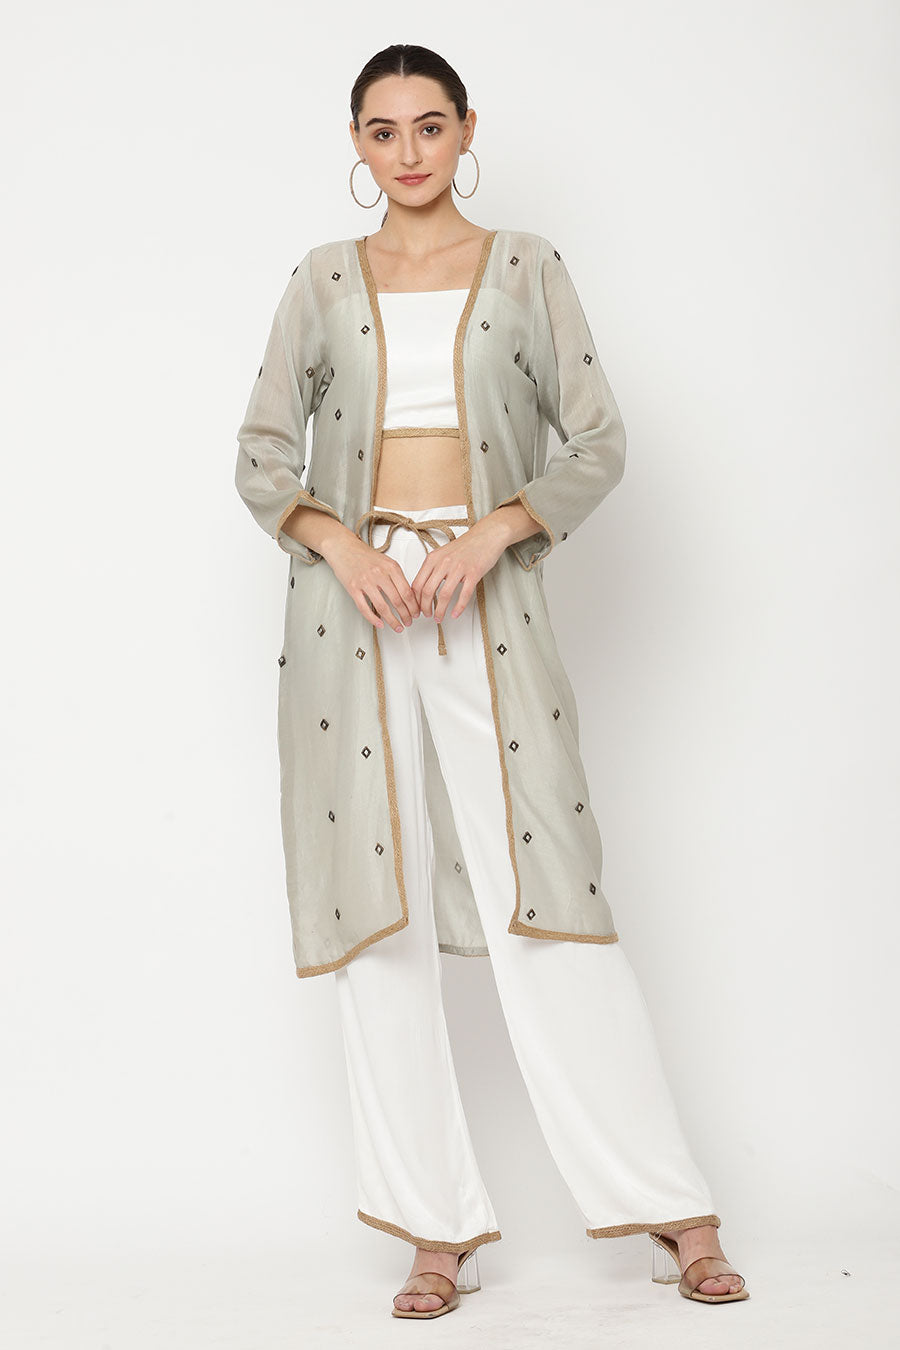 Ivory Top & Pant With Grey Embroidered Shrug Co-Ord Set